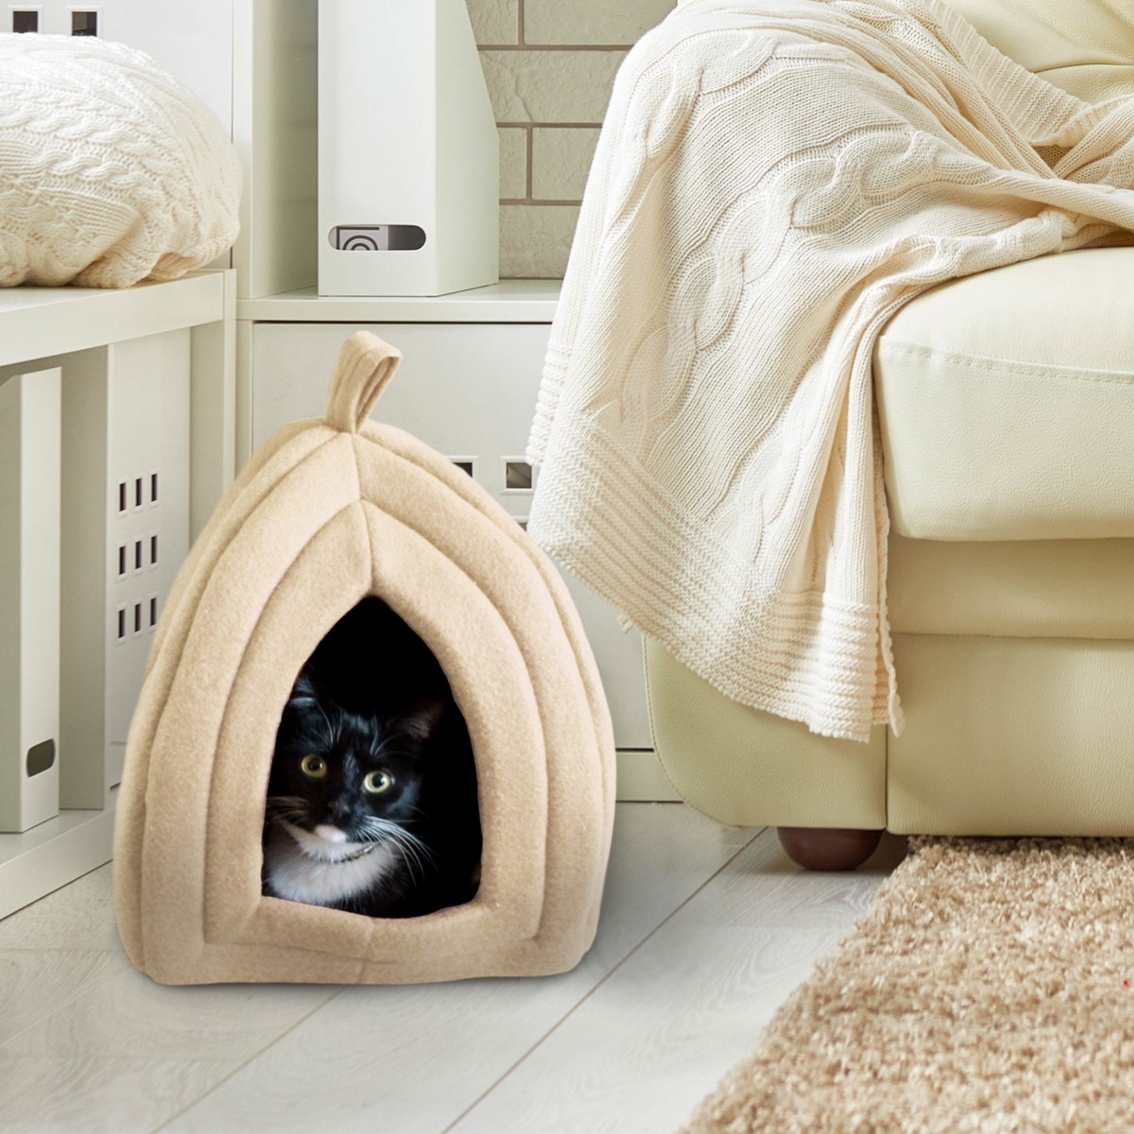 Petmaker Igloo Cat Bed with Cushion Pad - Image 3 of 3